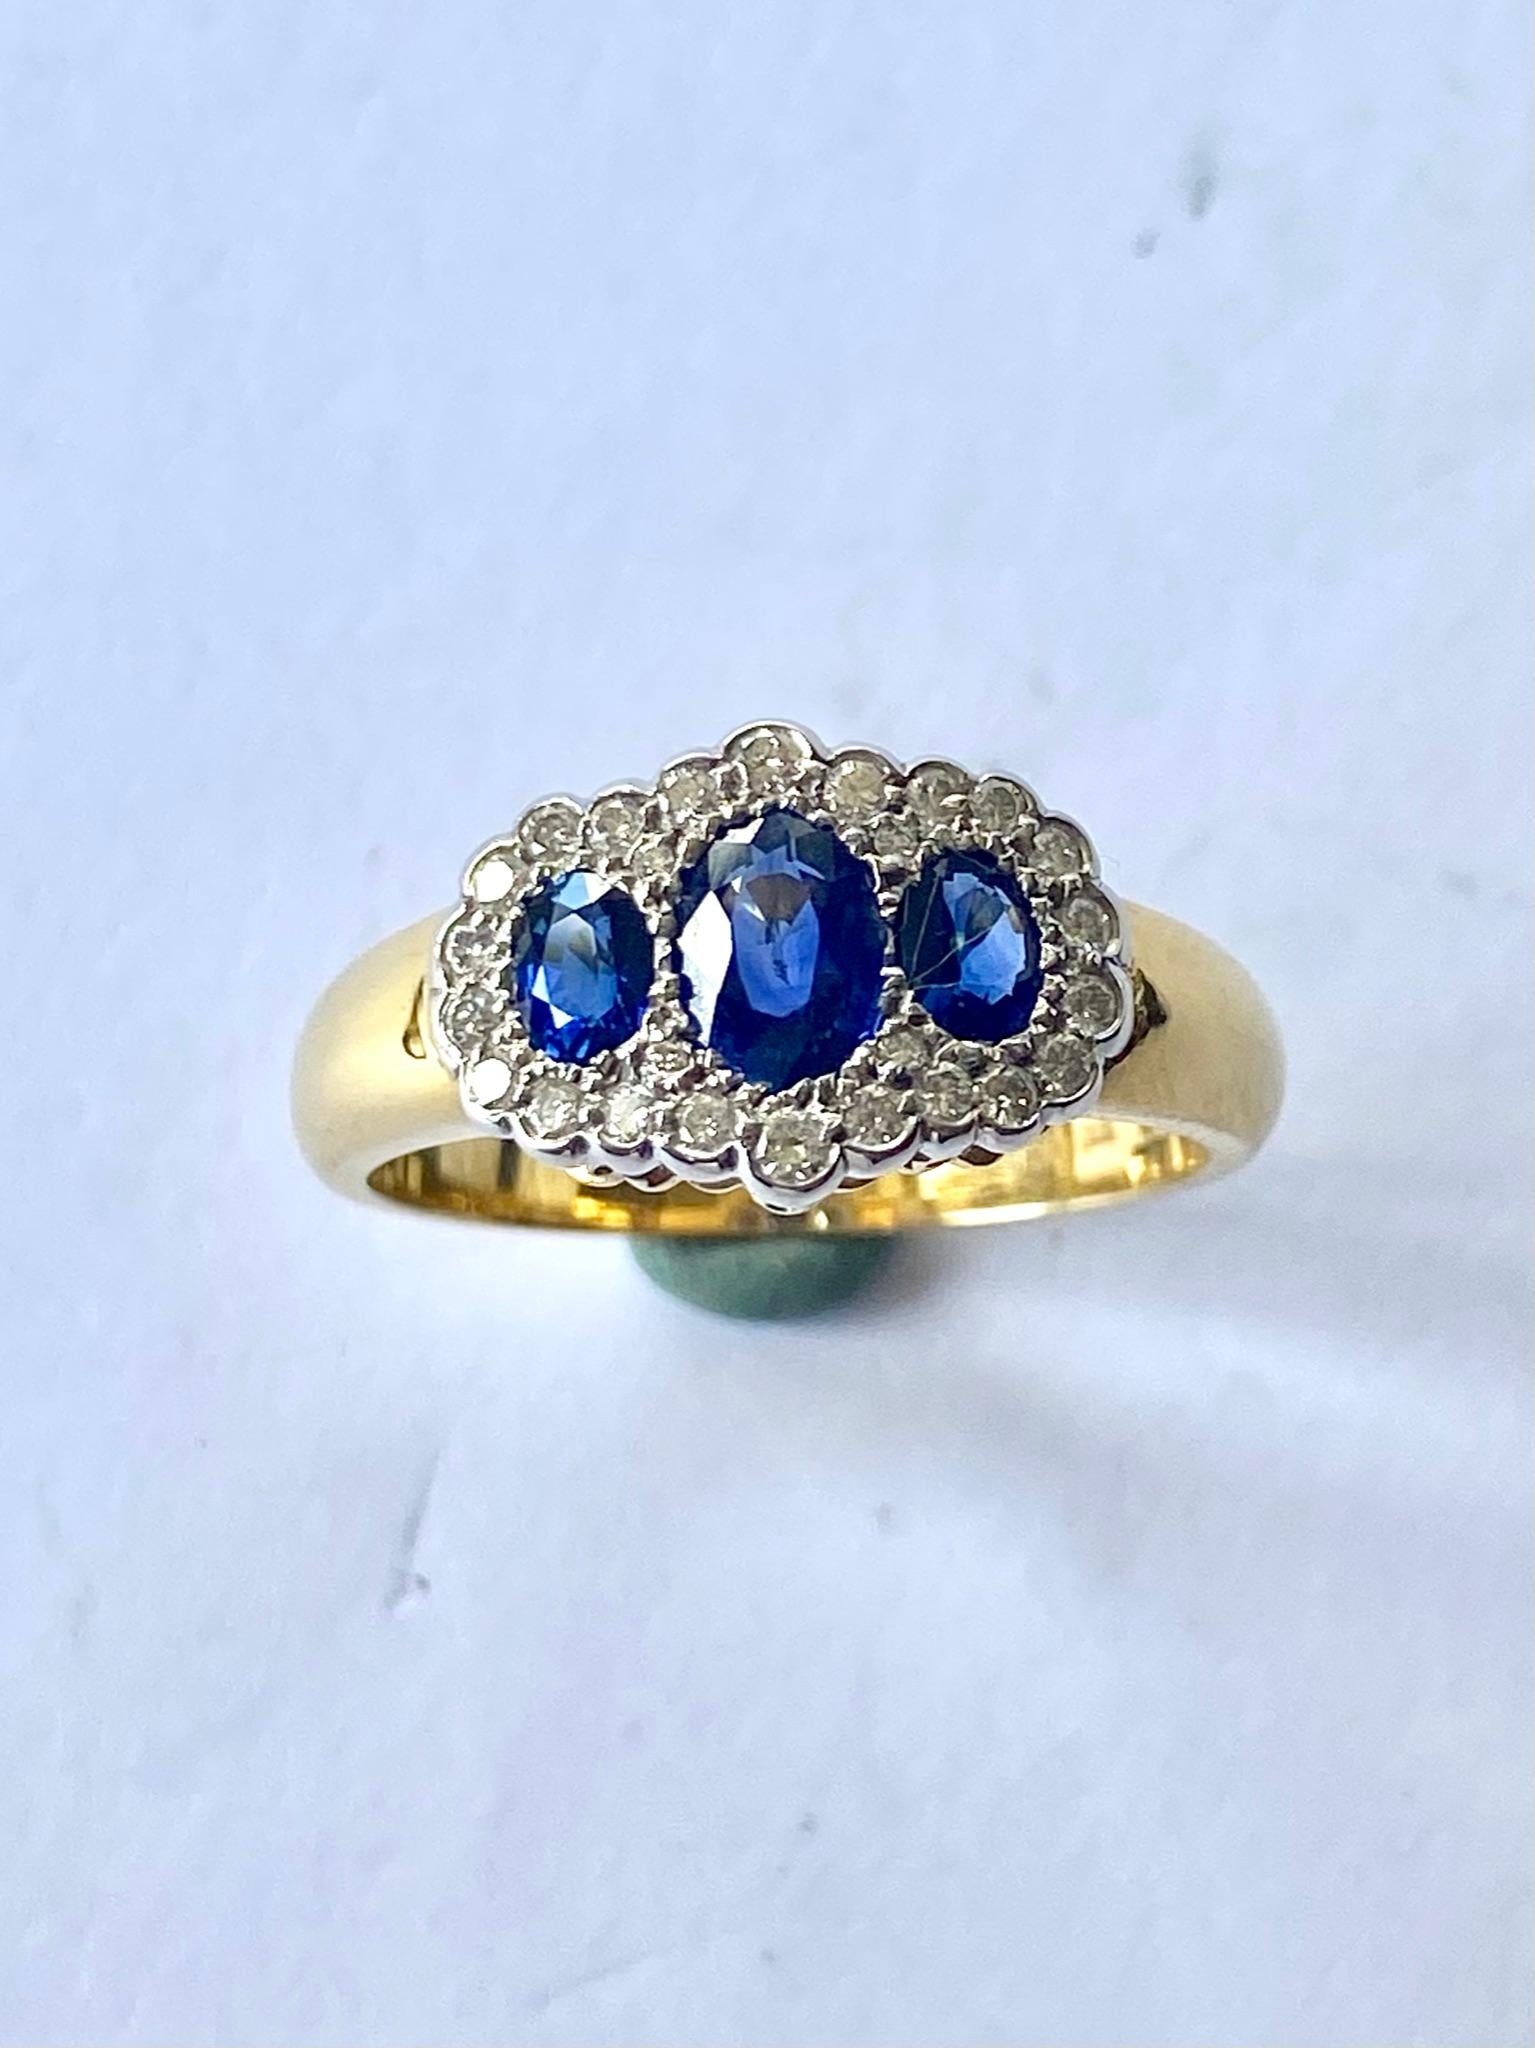 One (1) 18K. Yeloow and White Gold Ring, Stamped 750 with London Stampes (UK)
Set with:
Three (3) oval mixed Cut Natural Sapphires:  1.01 ct (deep blue)
Twenty Six (26) round briljant Cut natural Diamonds = 0.20 ct VS - F G
Classic 3 stone